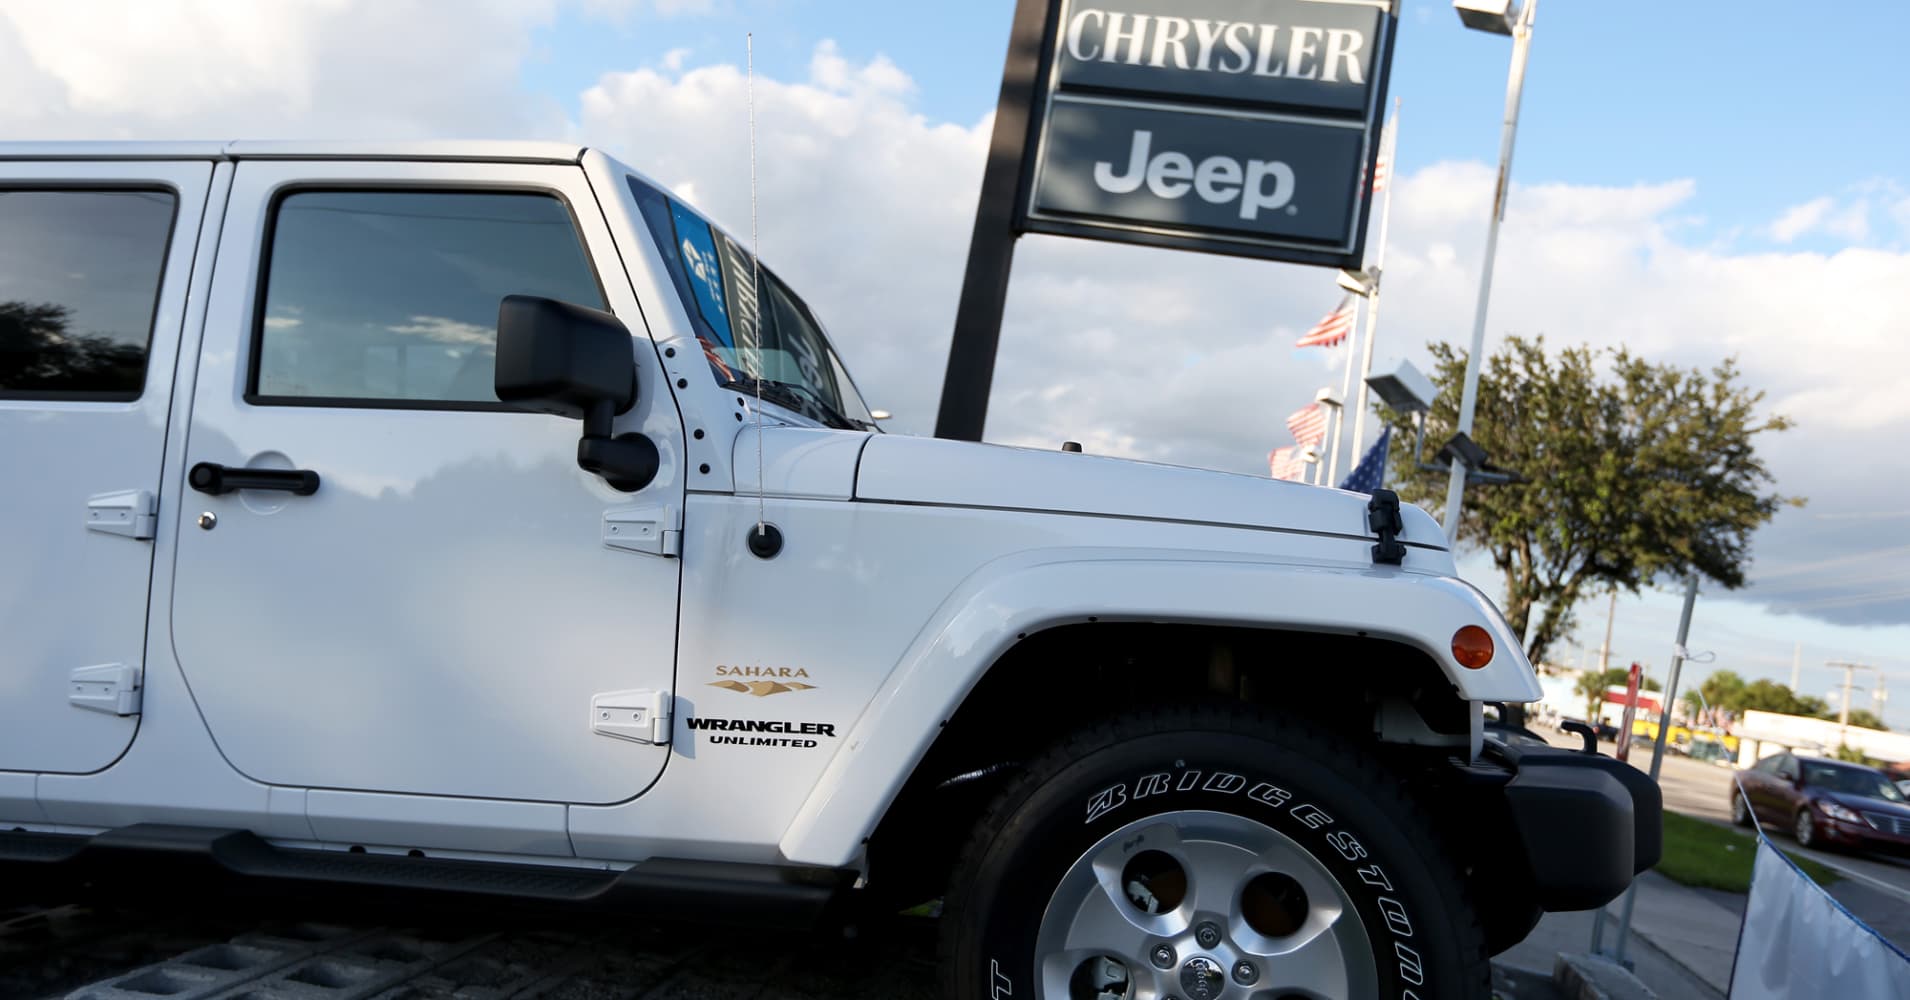 Jeep is worth more than Fiat Chrysler, says Morgan Stanley